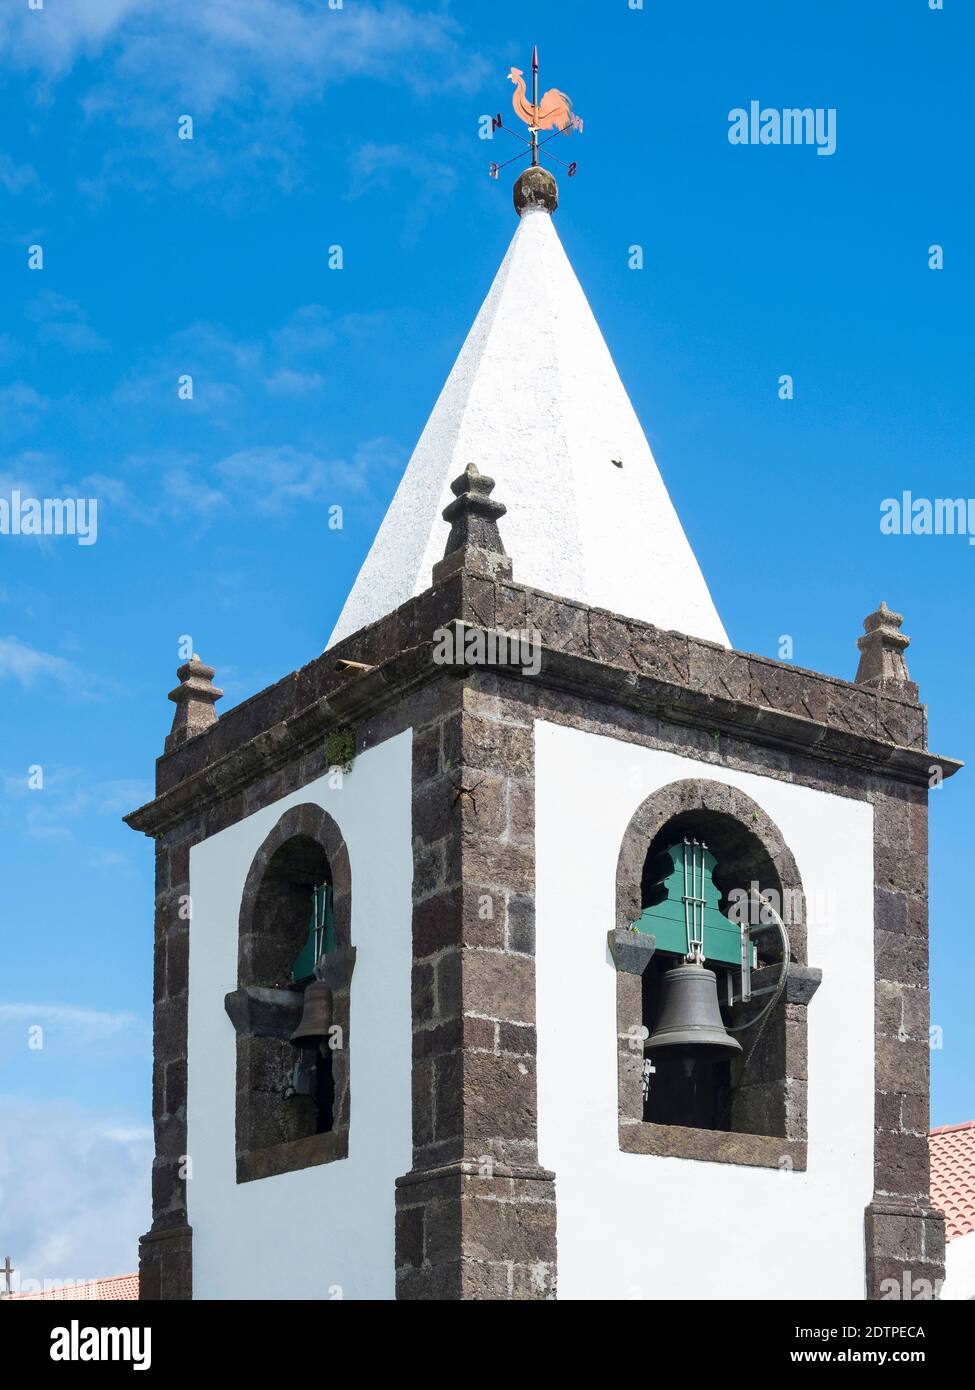 The church in Topo.  Sao Jorge Island, an island in the Azores (Ilhas dos Acores) in the Atlantic ocean. The Azores are an autonomous region of Portug Stock Photo